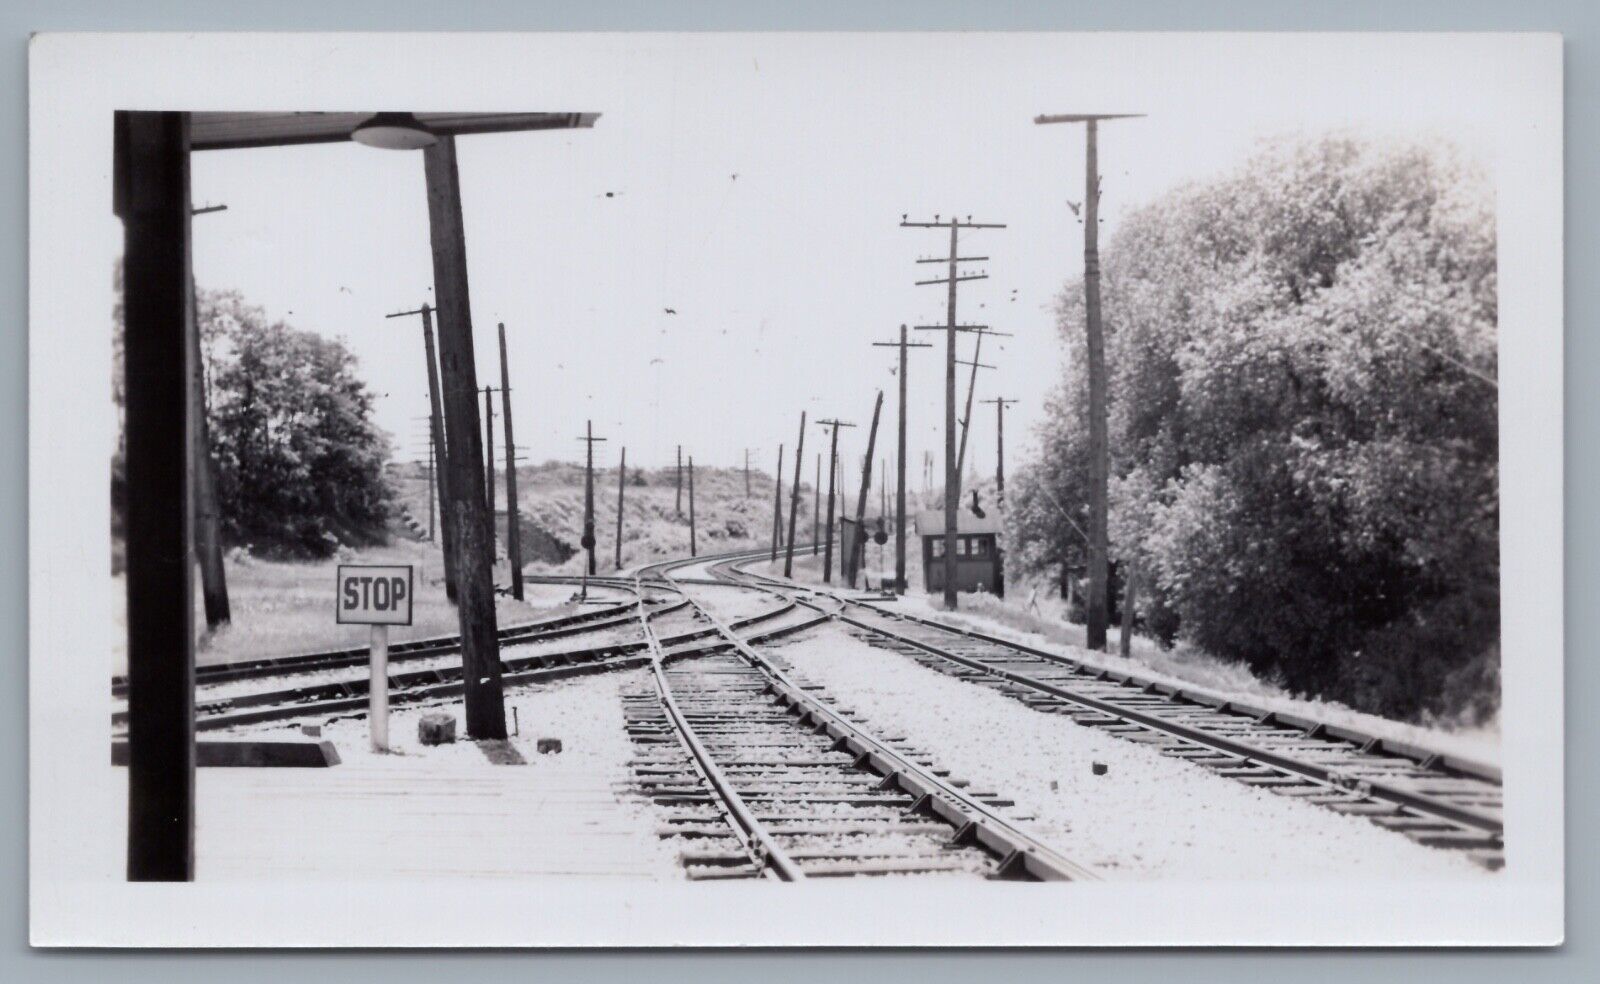 Trolley Photo - Unknown Location Early Streetcar Lines Tracks Stop Sign 1930s